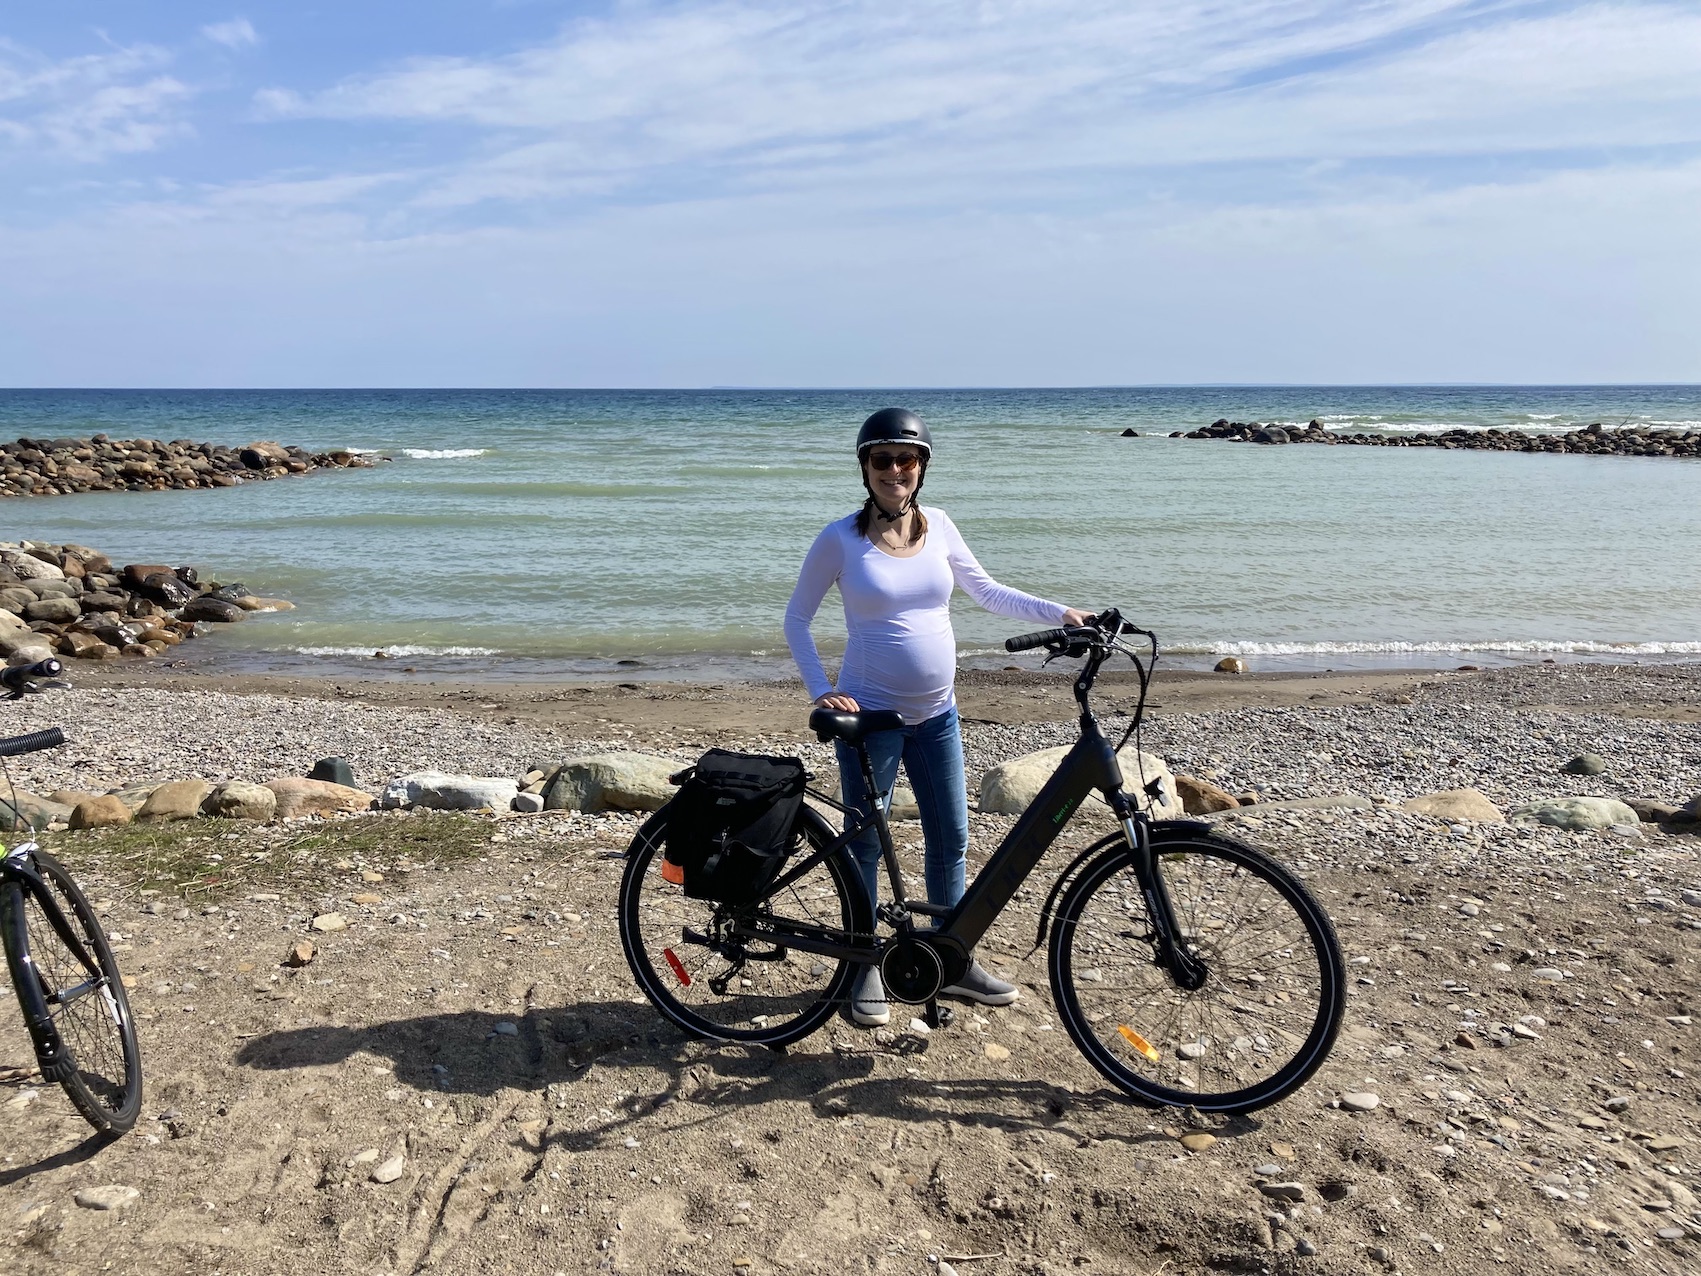 A photo of me standing with my e-bike on a rocky beach with Georgian Bay in the background.